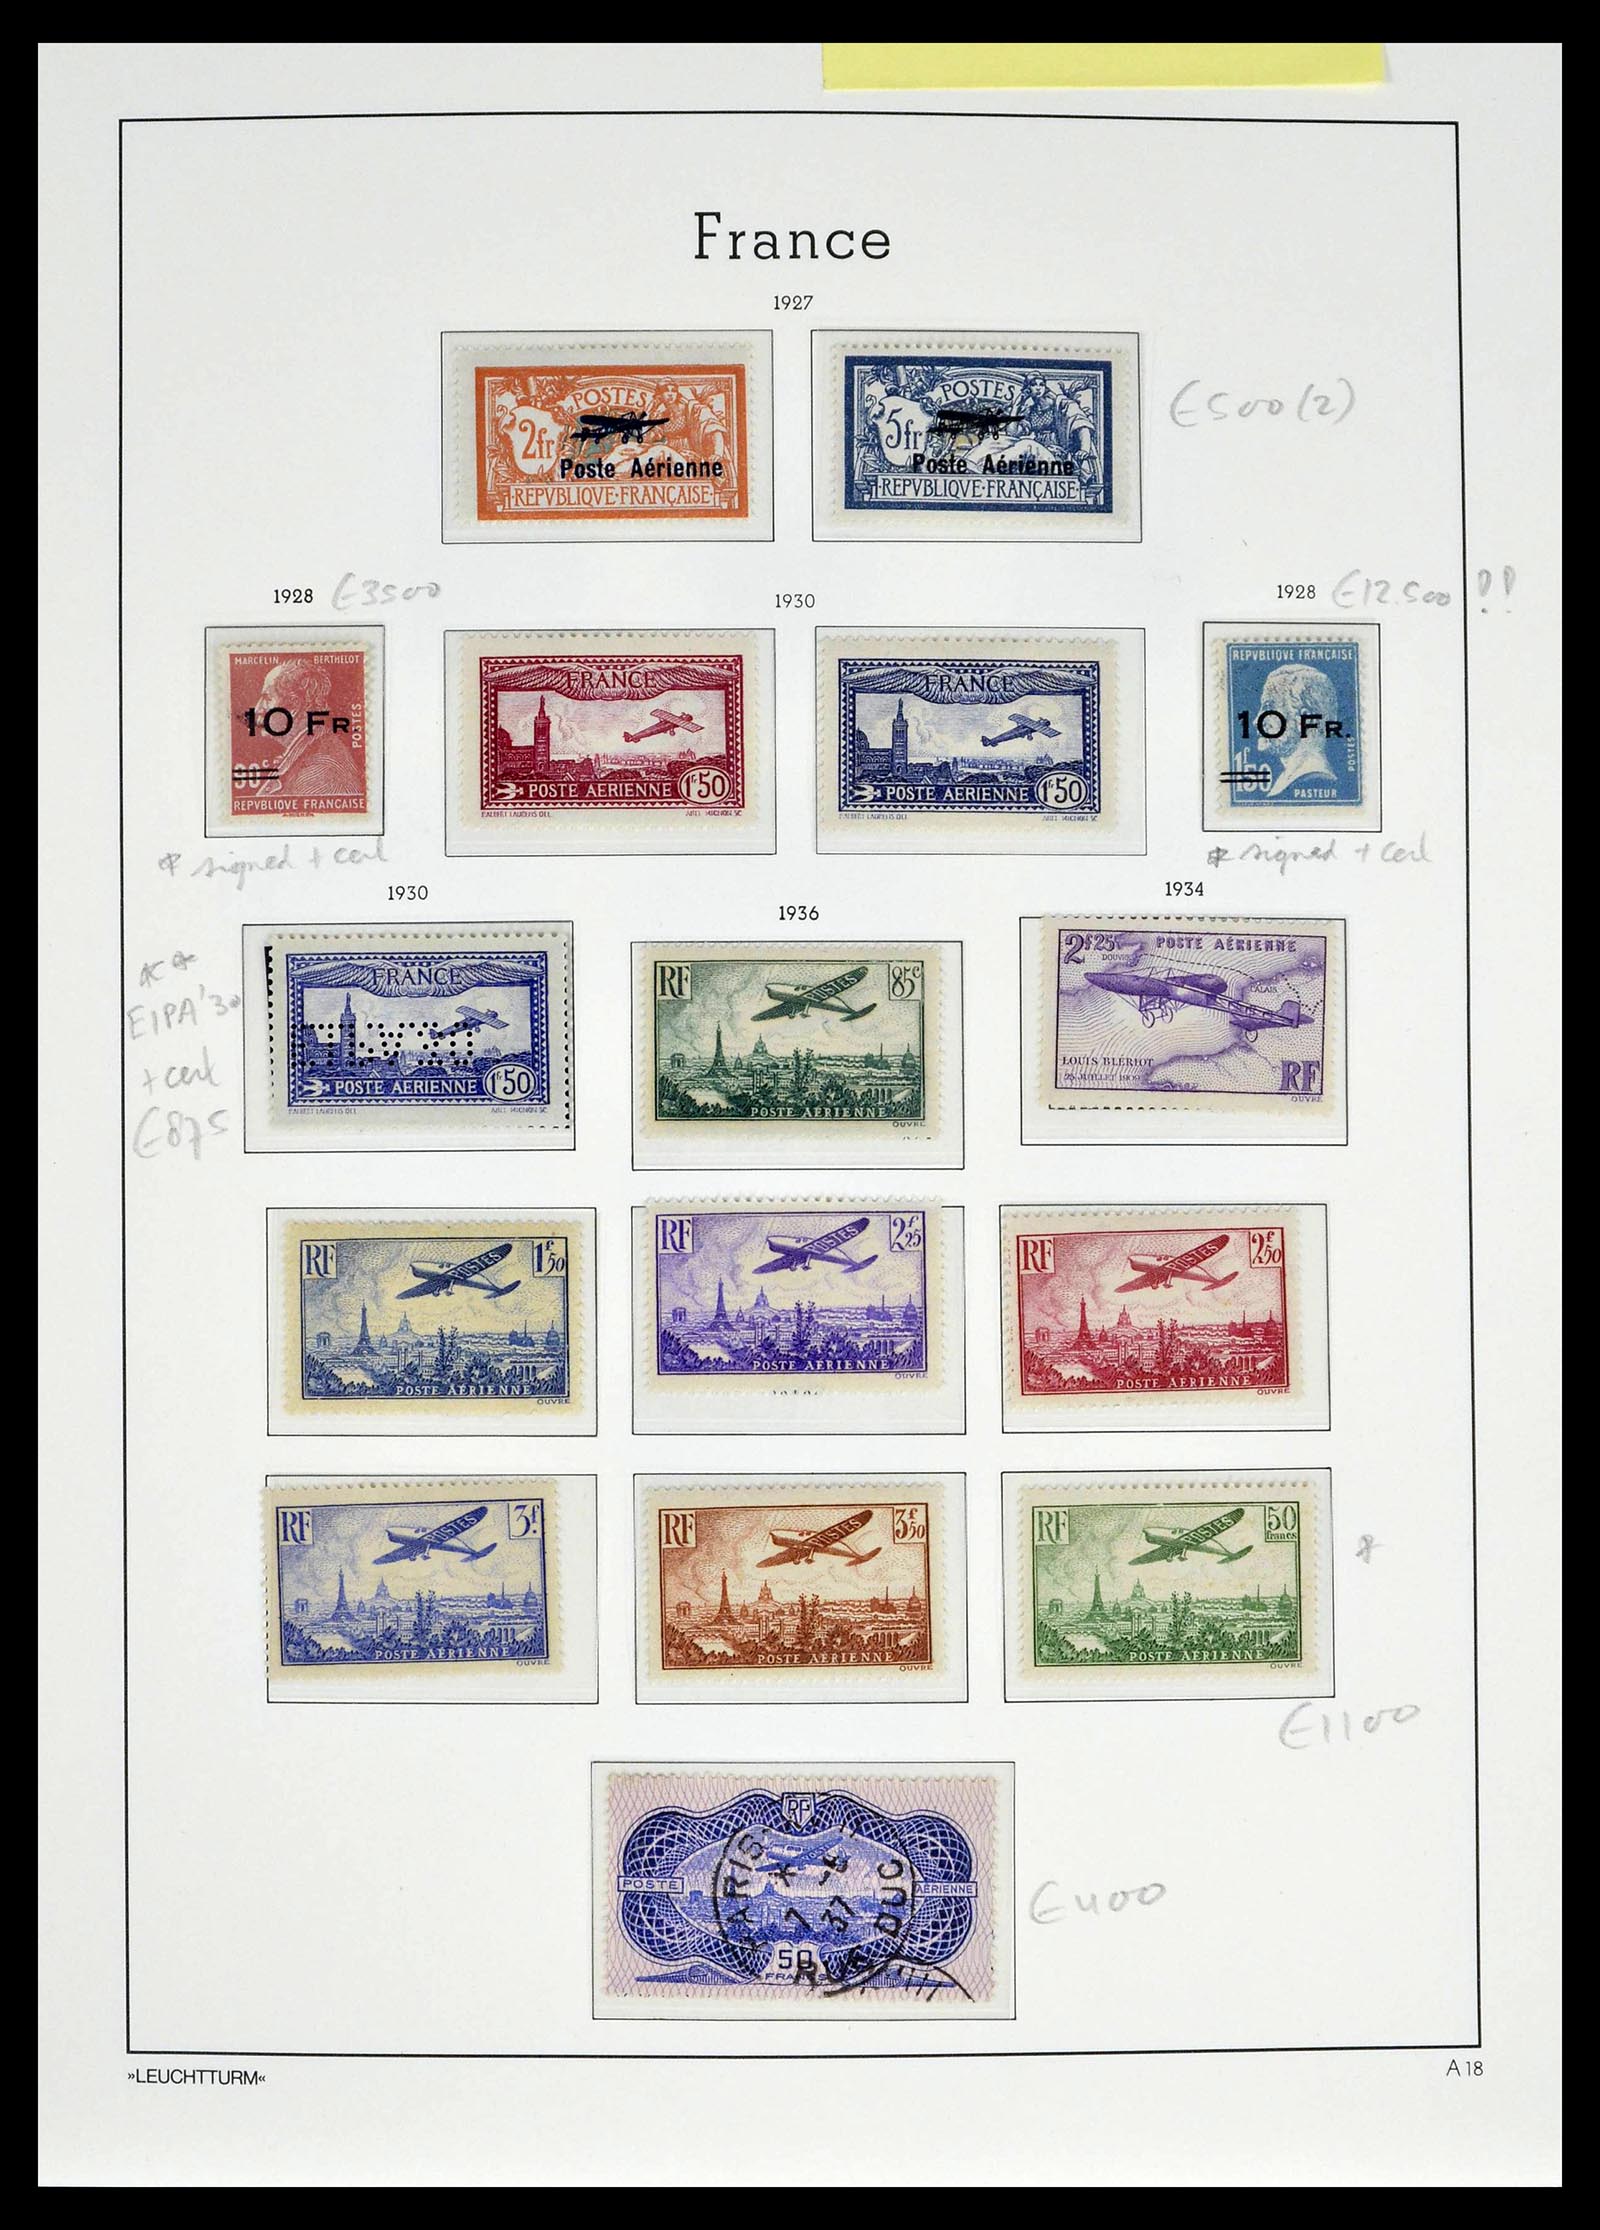 39385 0021 - Stamp collection 39385 France 1900-1944.